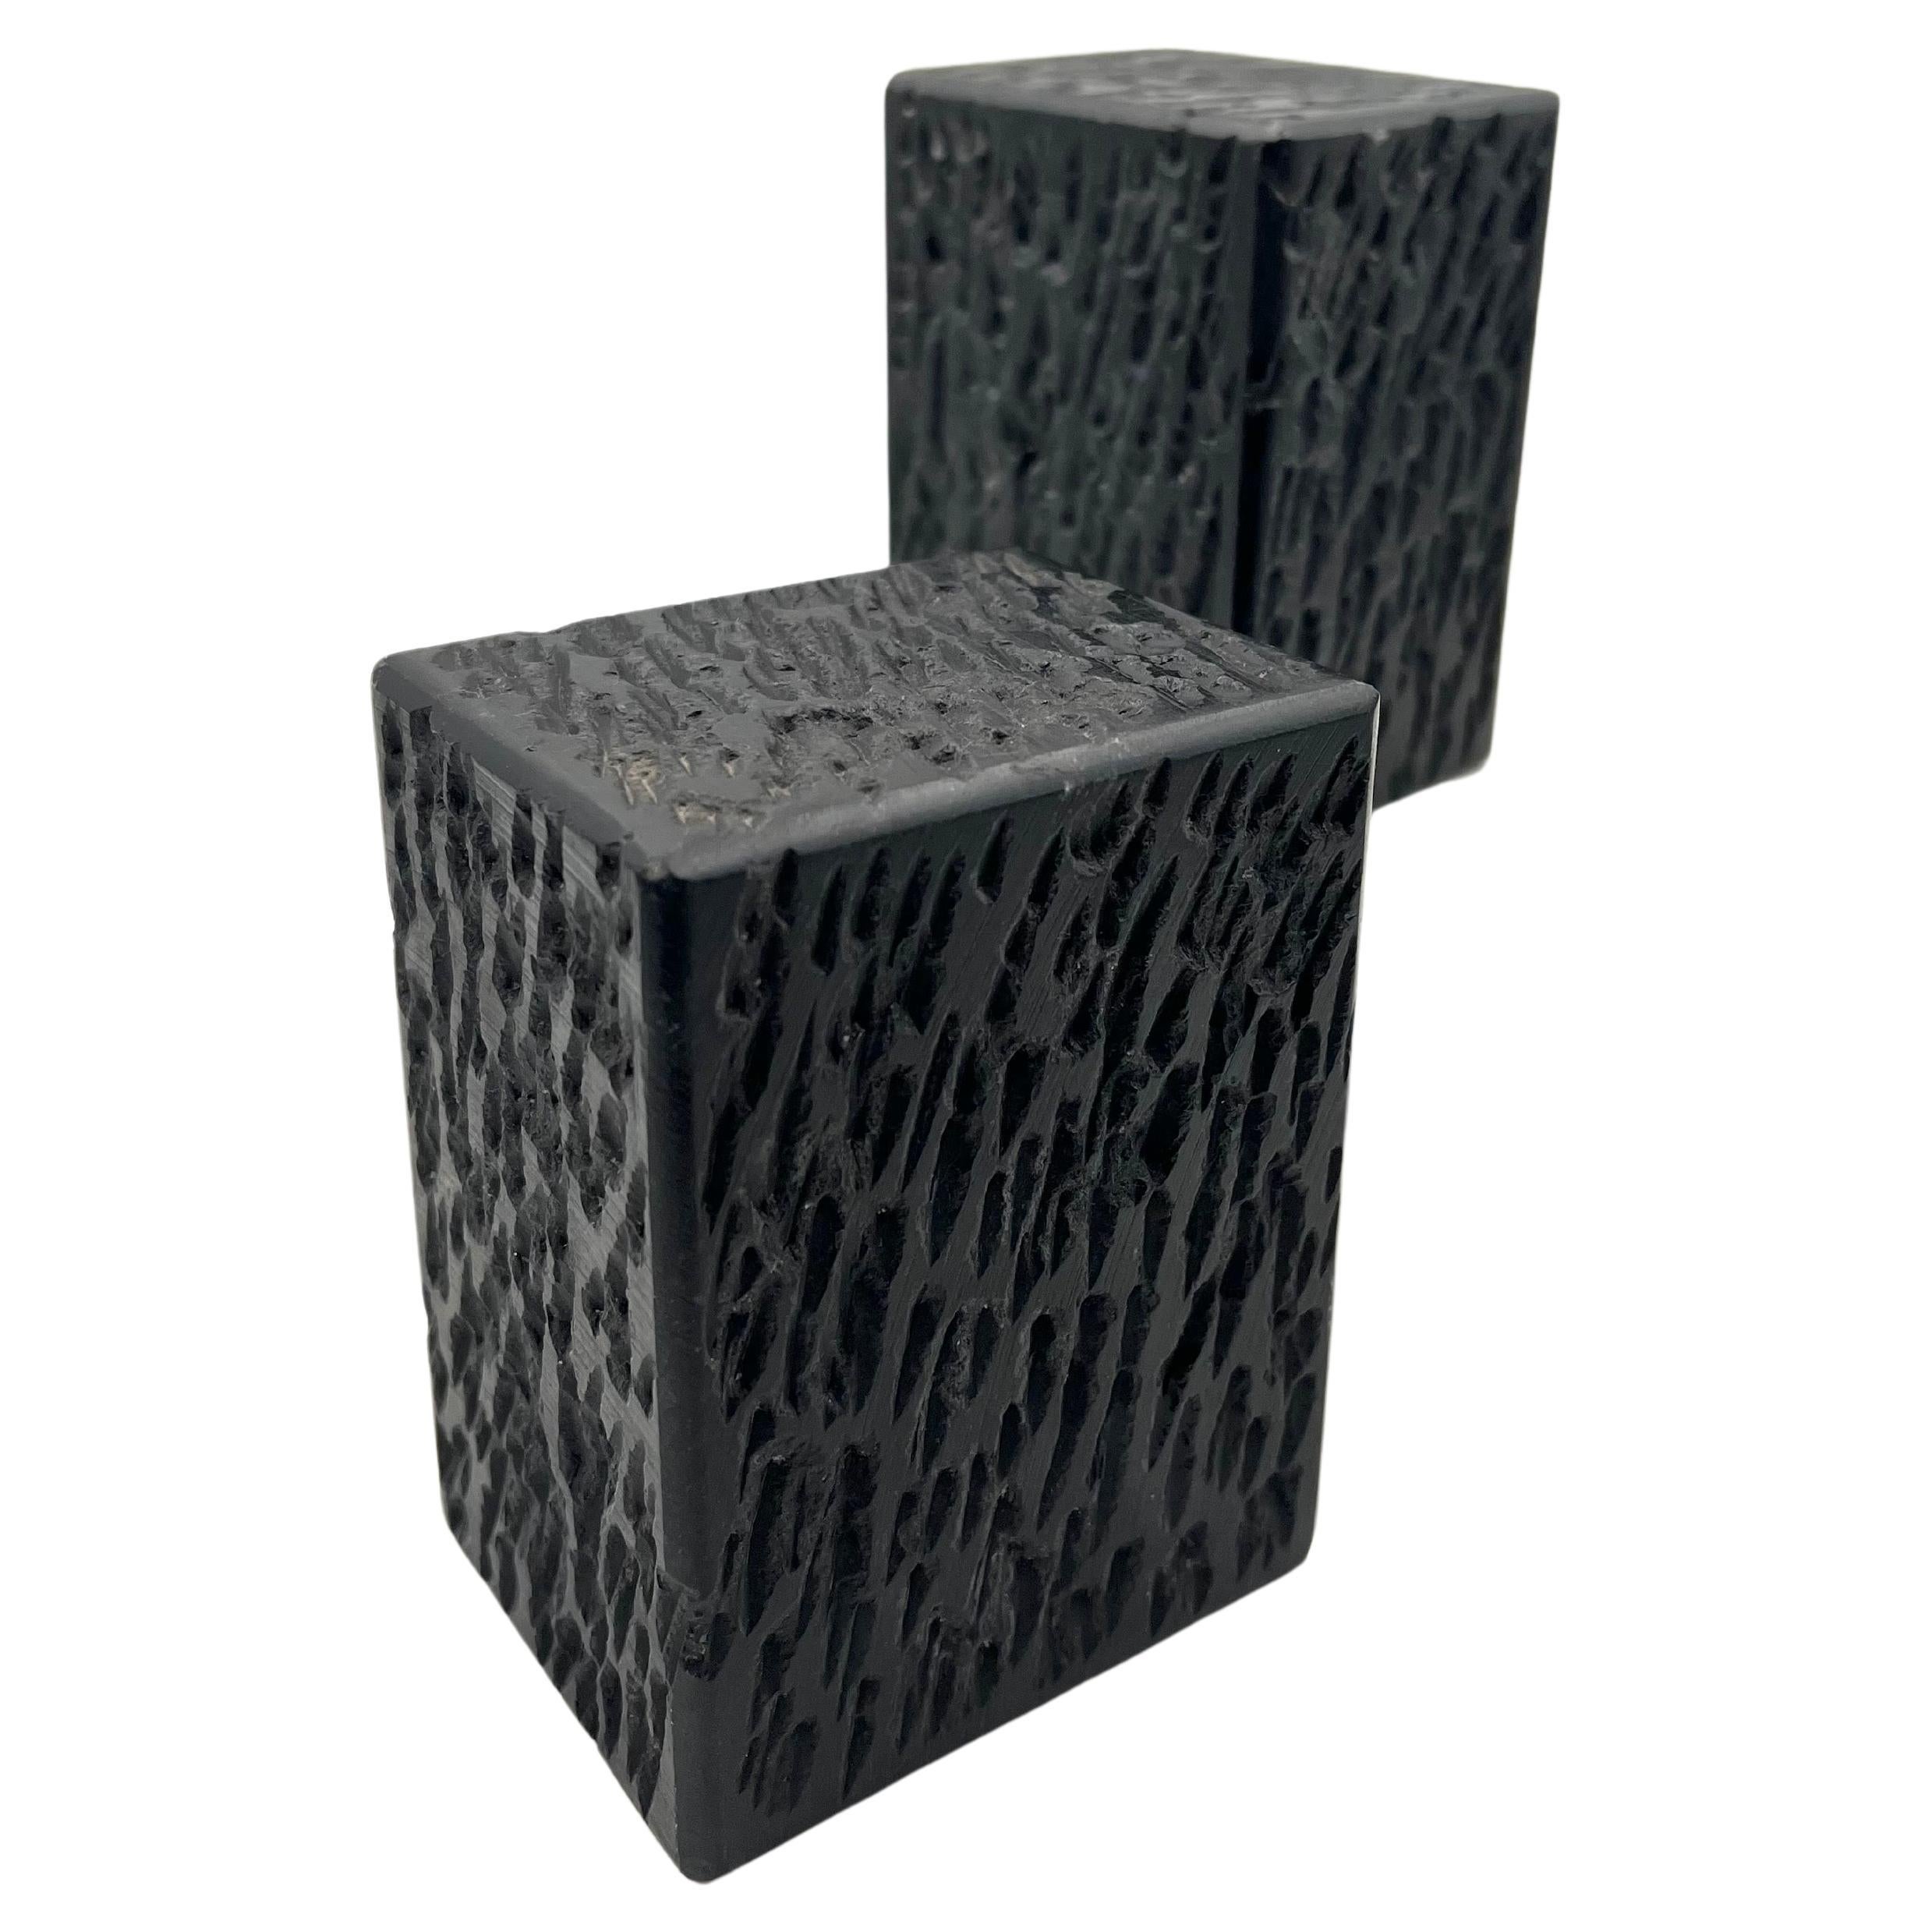 Pair of Solid Marble Modernist Bookends Blocks with Textured Finish